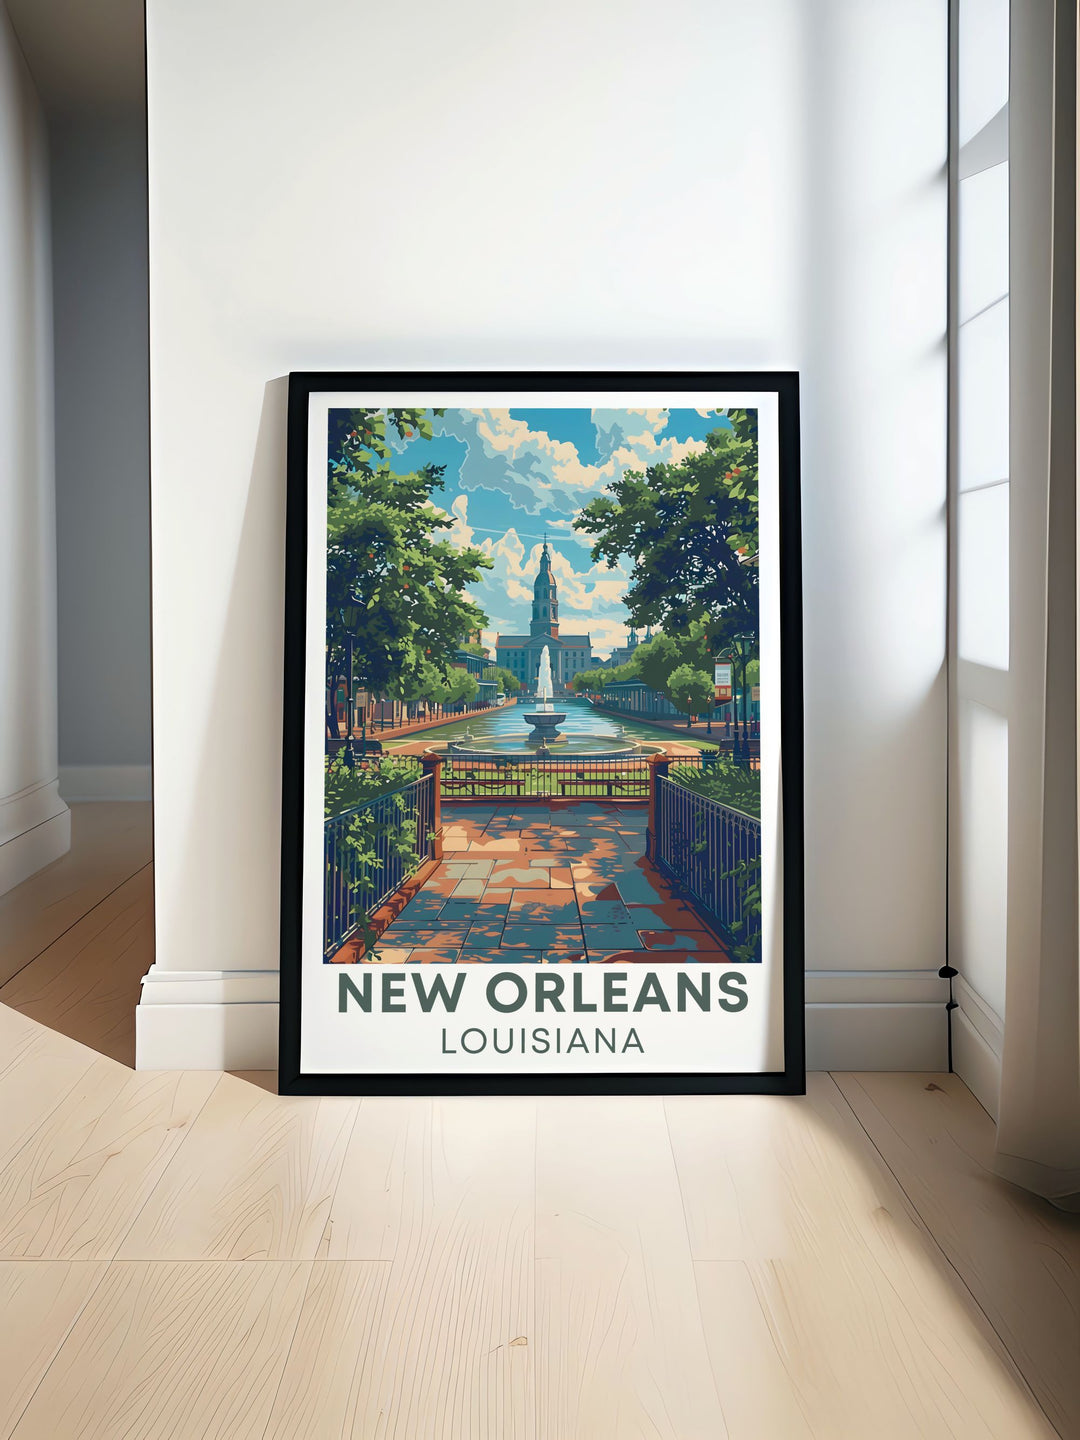 Jackson Square travel poster capturing the vibrant atmosphere and historic architecture of New Orleans perfect for home decor or as a travel gift showcasing the rich cultural heritage of this iconic Louisiana landmark